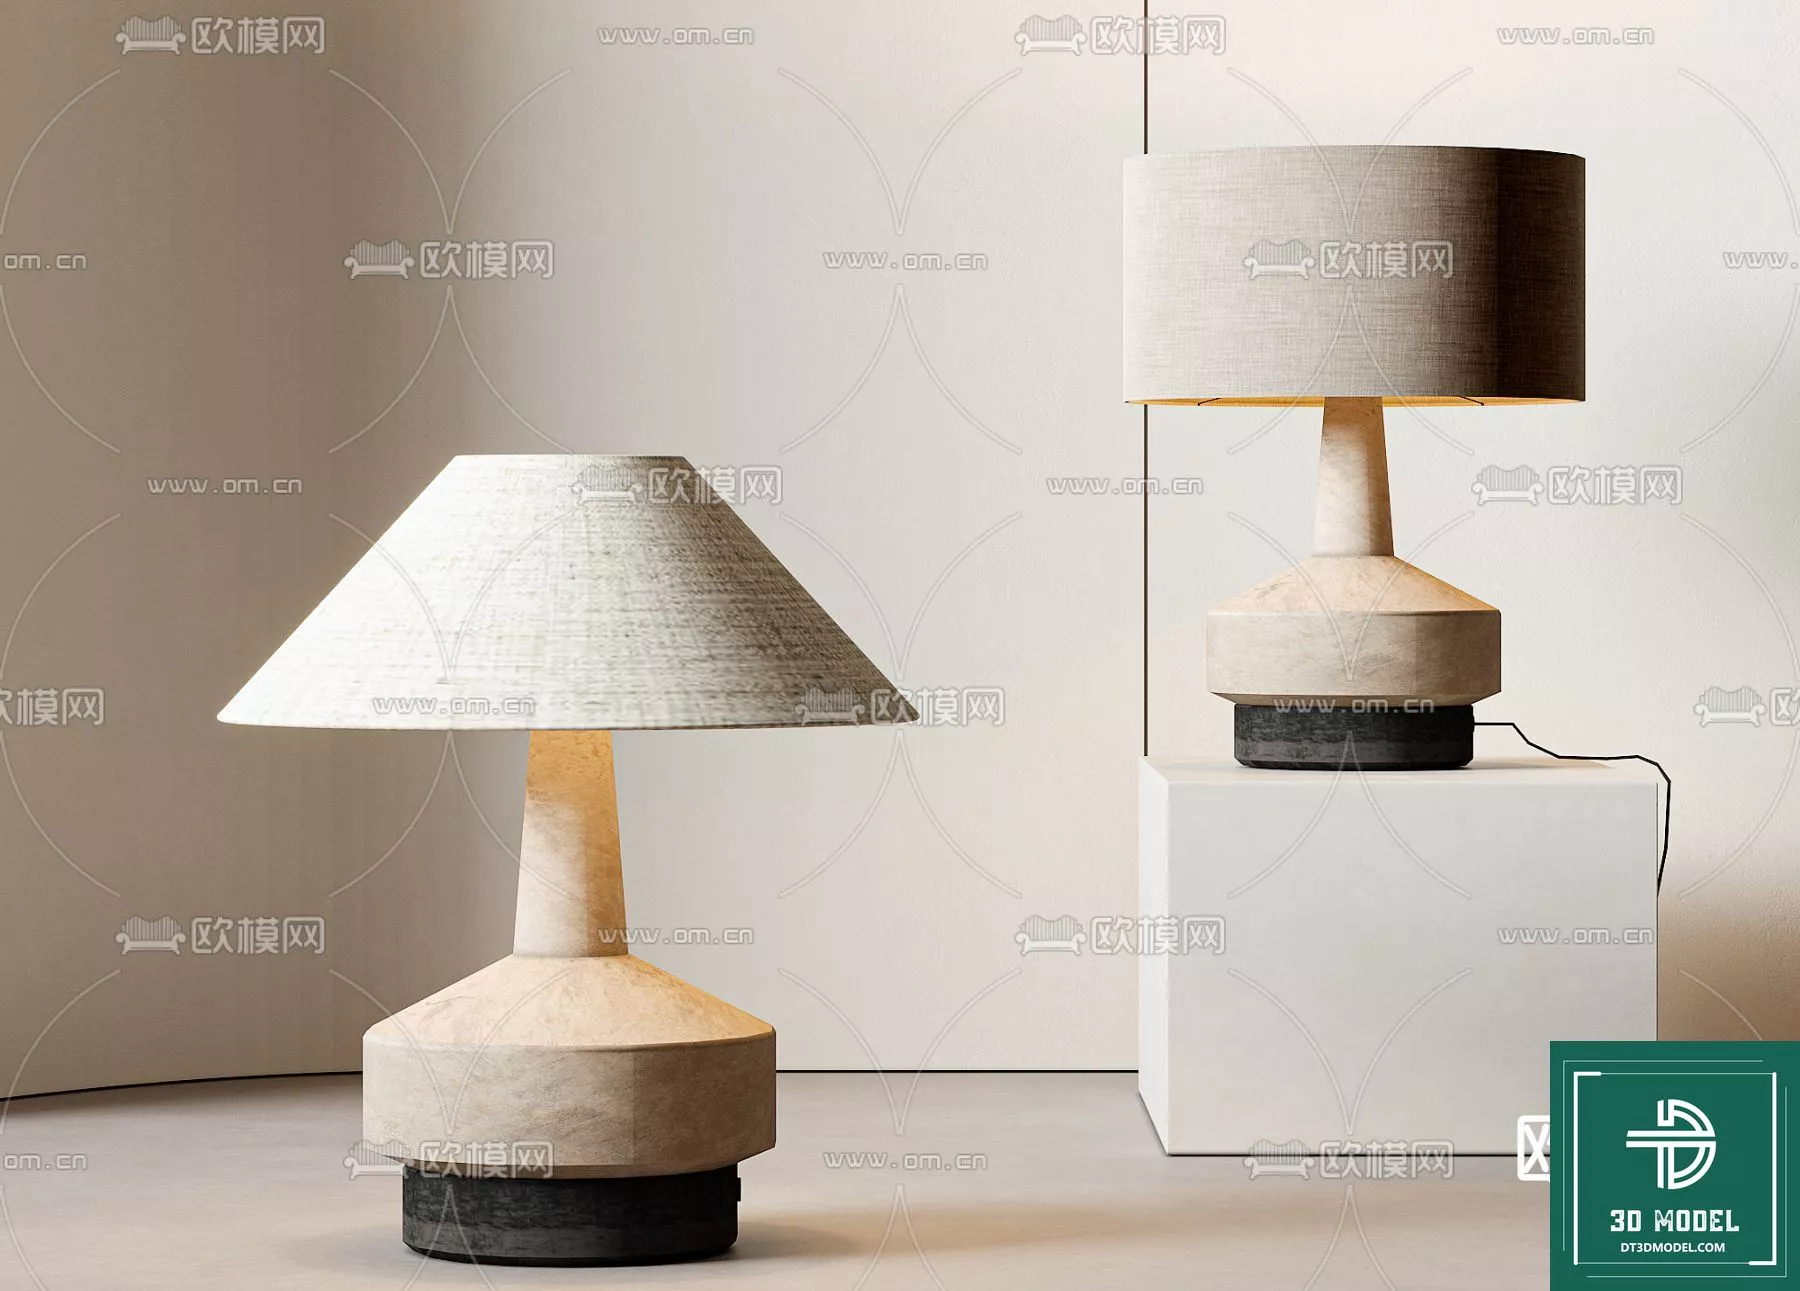 MODERN TABLE LAMP - SKETCHUP 3D MODEL - VRAY OR ENSCAPE - ID14568